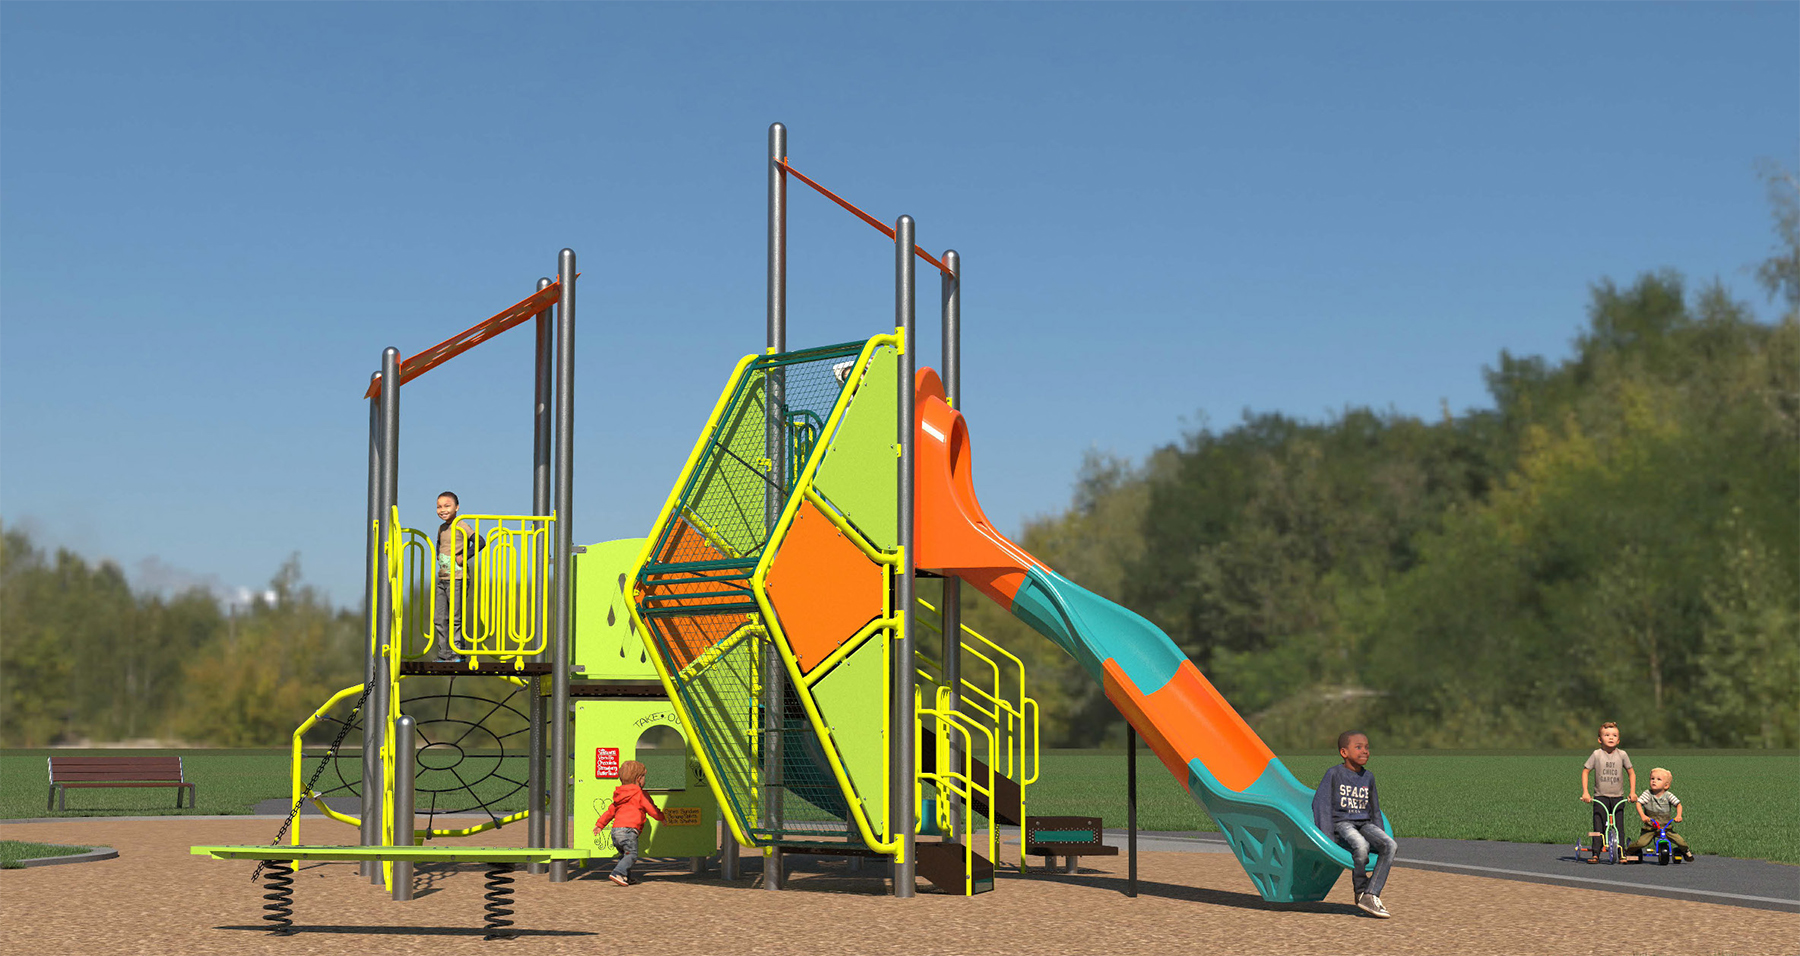 The final design for the new Heathrow Park Playground, side view looking north. The playground will be lime green, silver, orange and teal, and include the play features listed following the image(s).